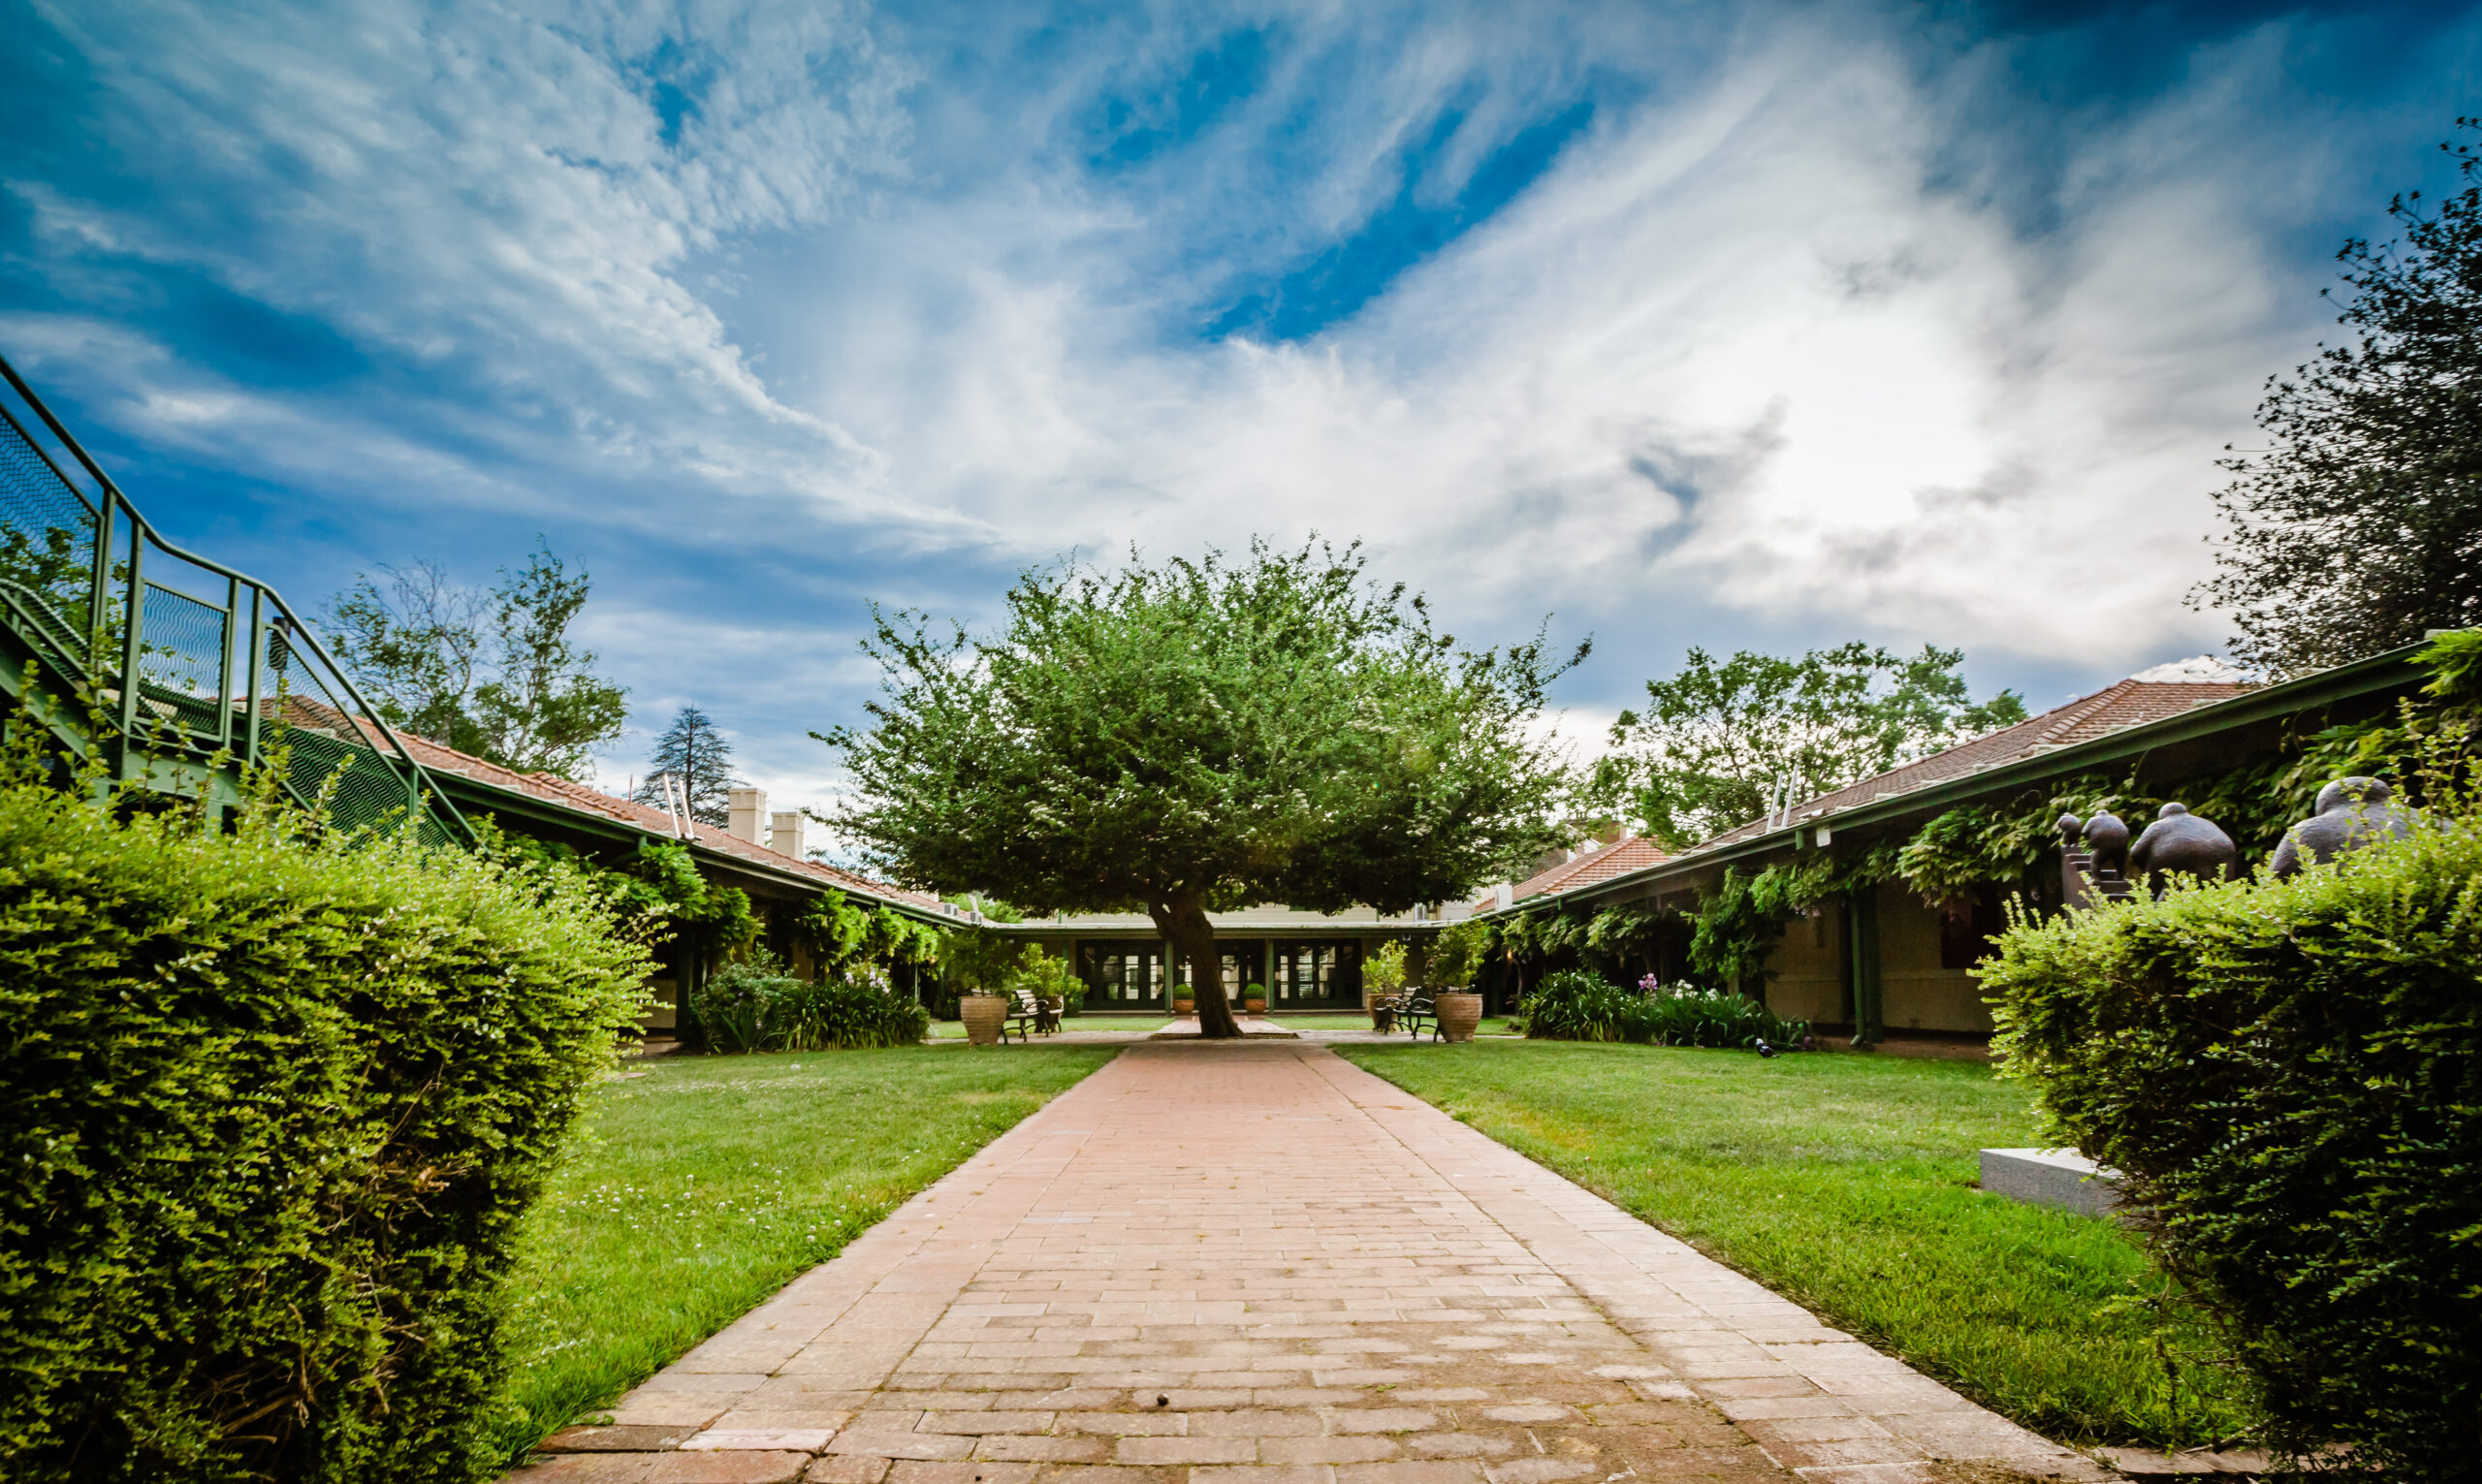 Photo of a courtyard with a large tree in the middle.